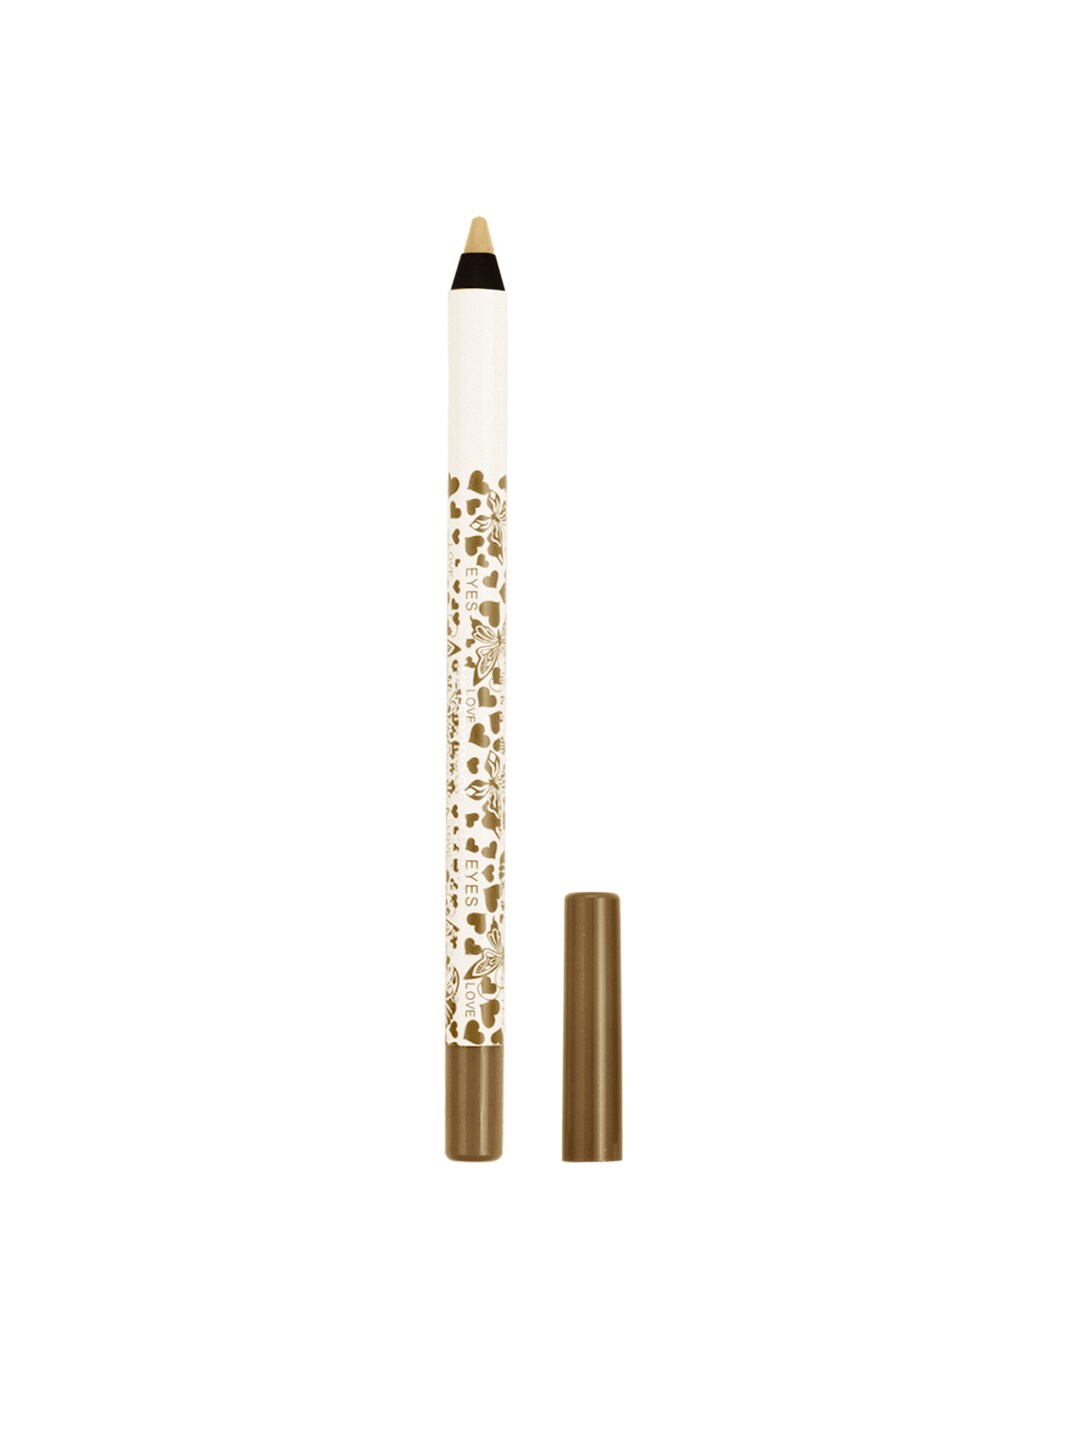 Daily Life Forever52 Gold Waterproof Smoothening Eye Pencil 1.2g Price in India